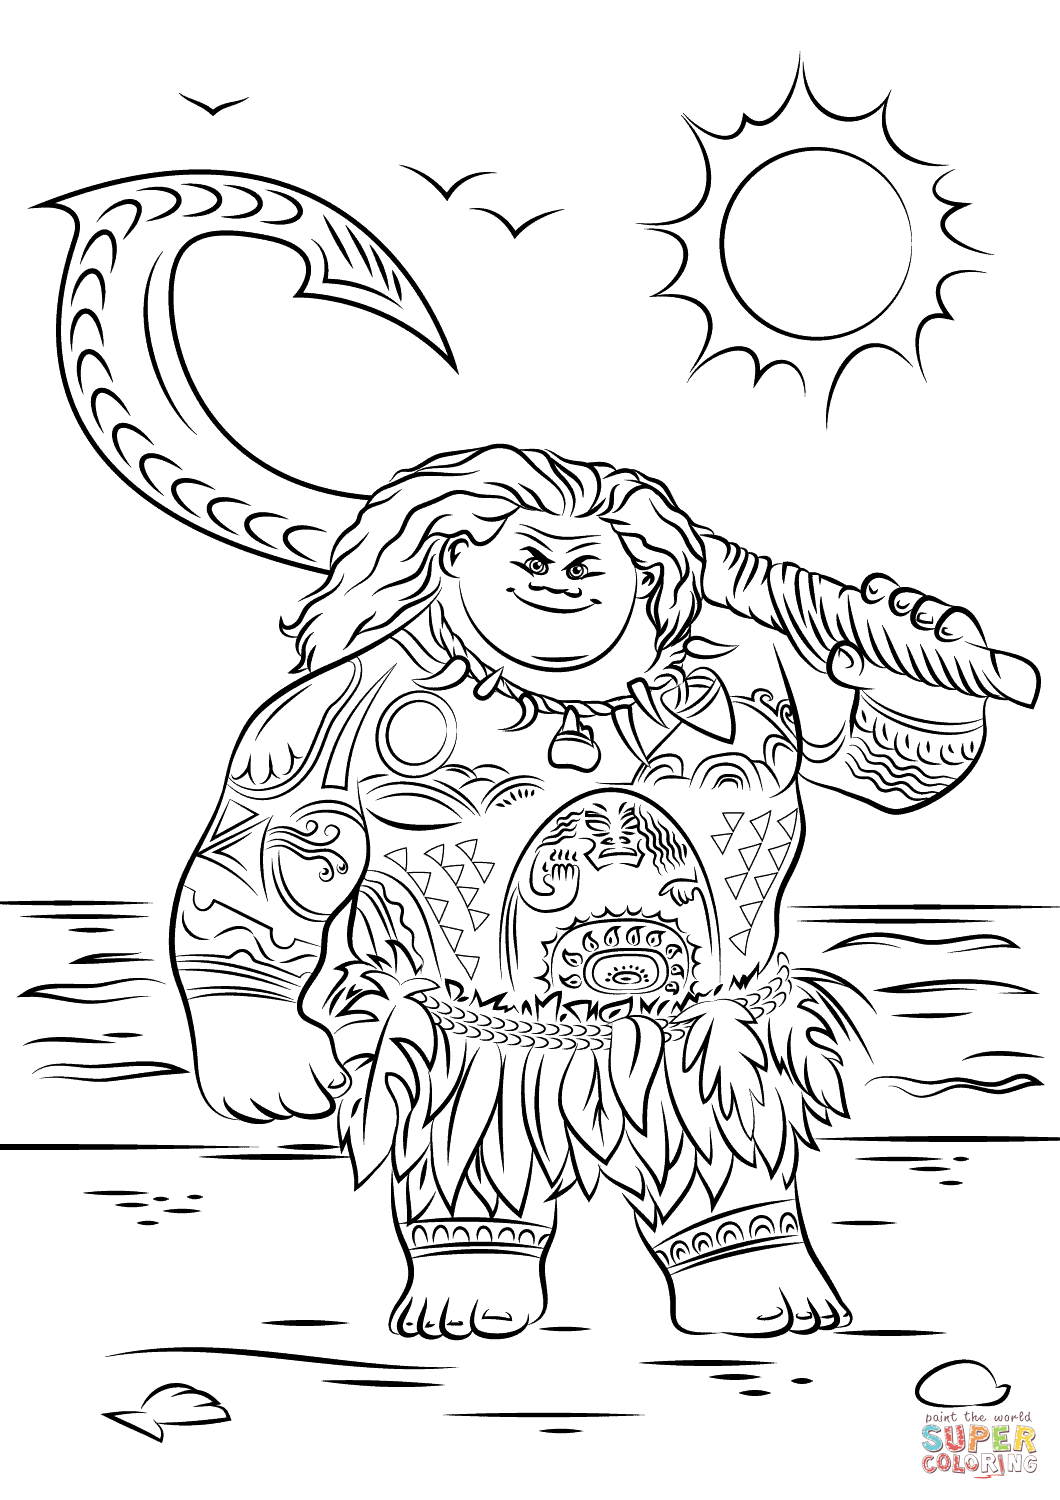 Free Moana coloring page to print and color : Chief Tui with sea and sun in background